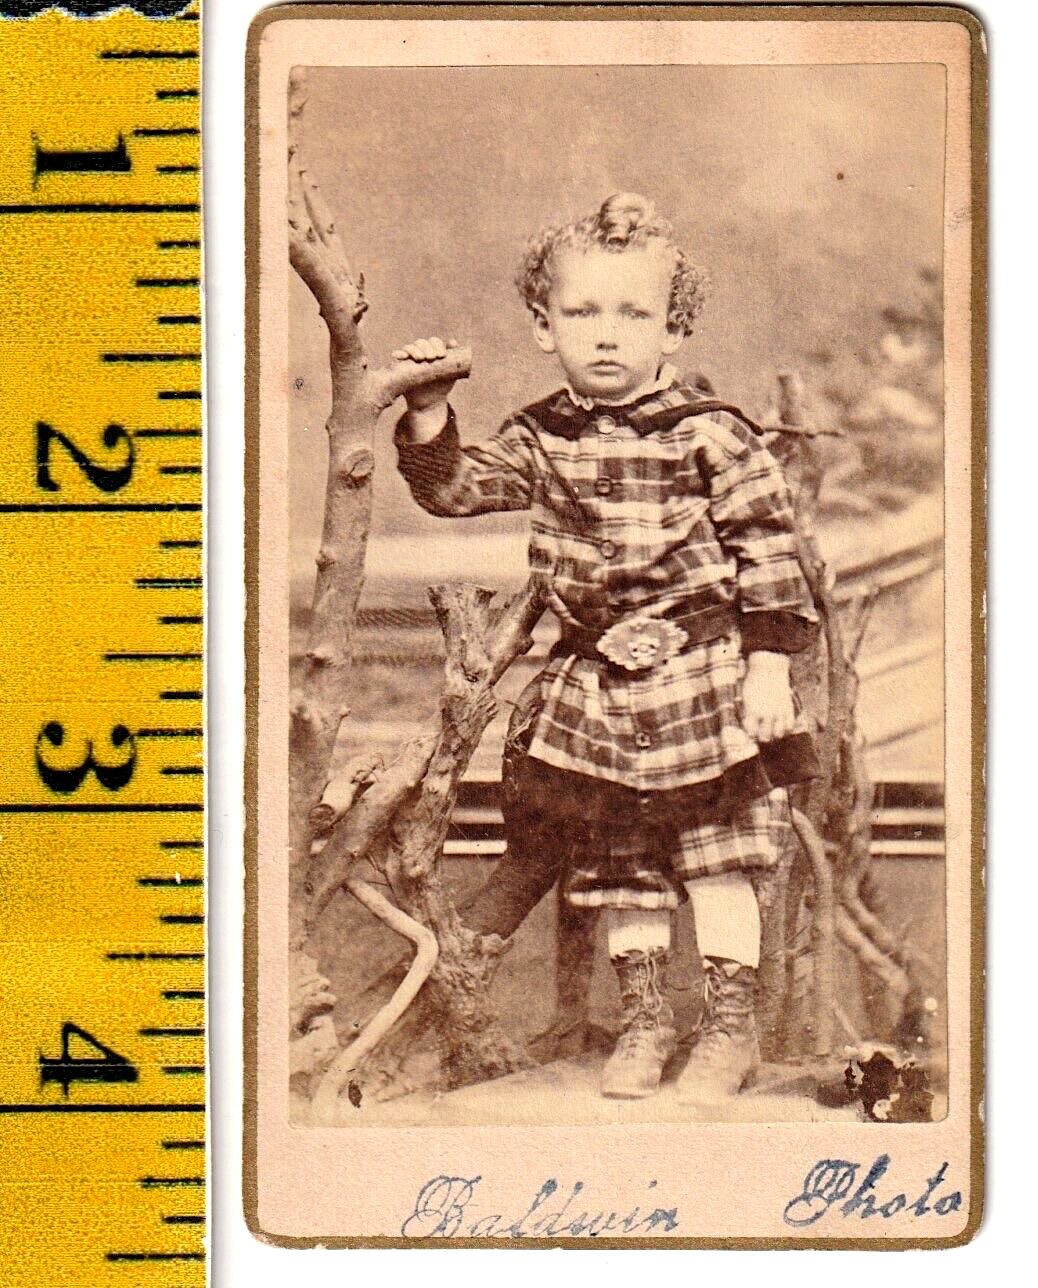 Vintage ca 1865 CDV Photo Depicting Small Child in Plaid Outfit, Baldwin Photo